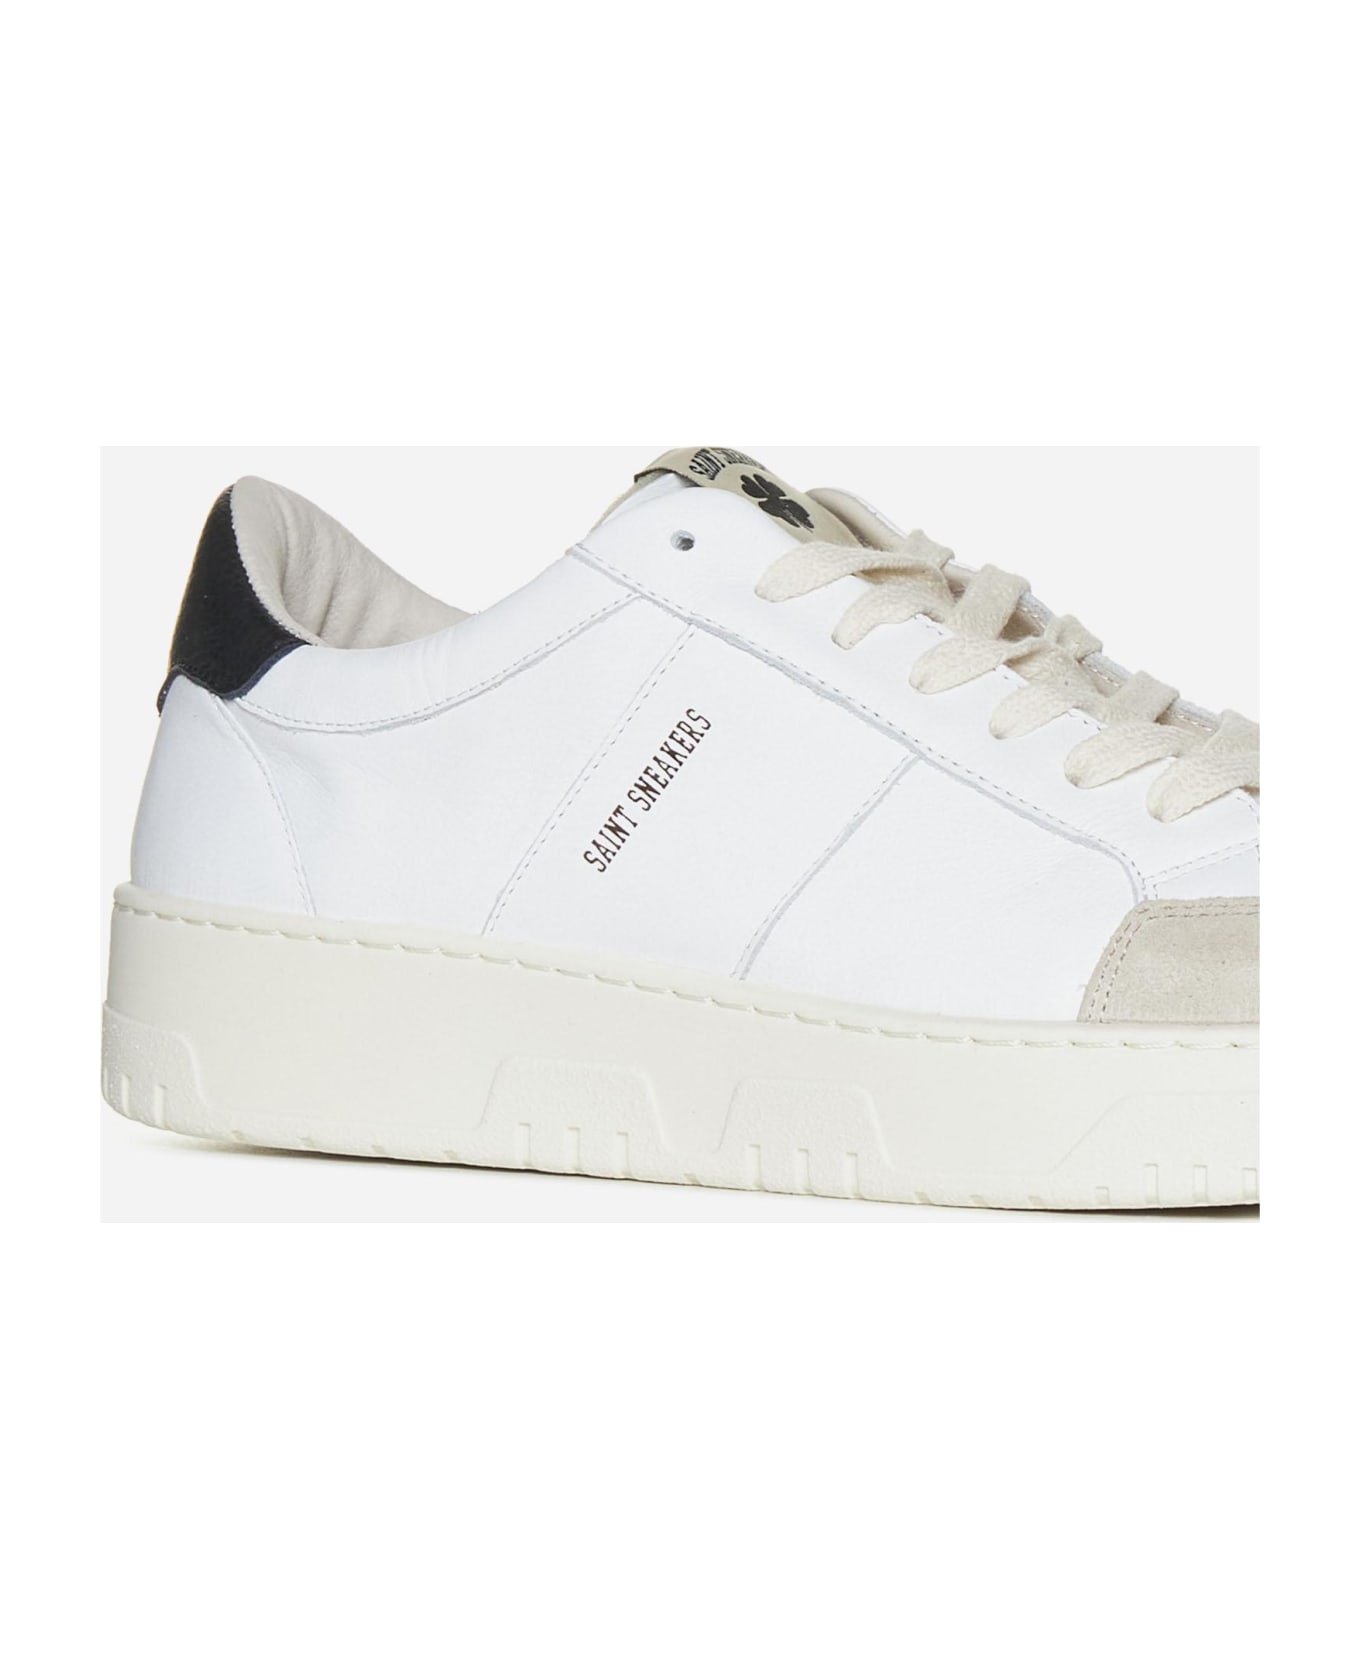 Saint Sneakers Sail Leather Sneakers - Multicolor スニーカー